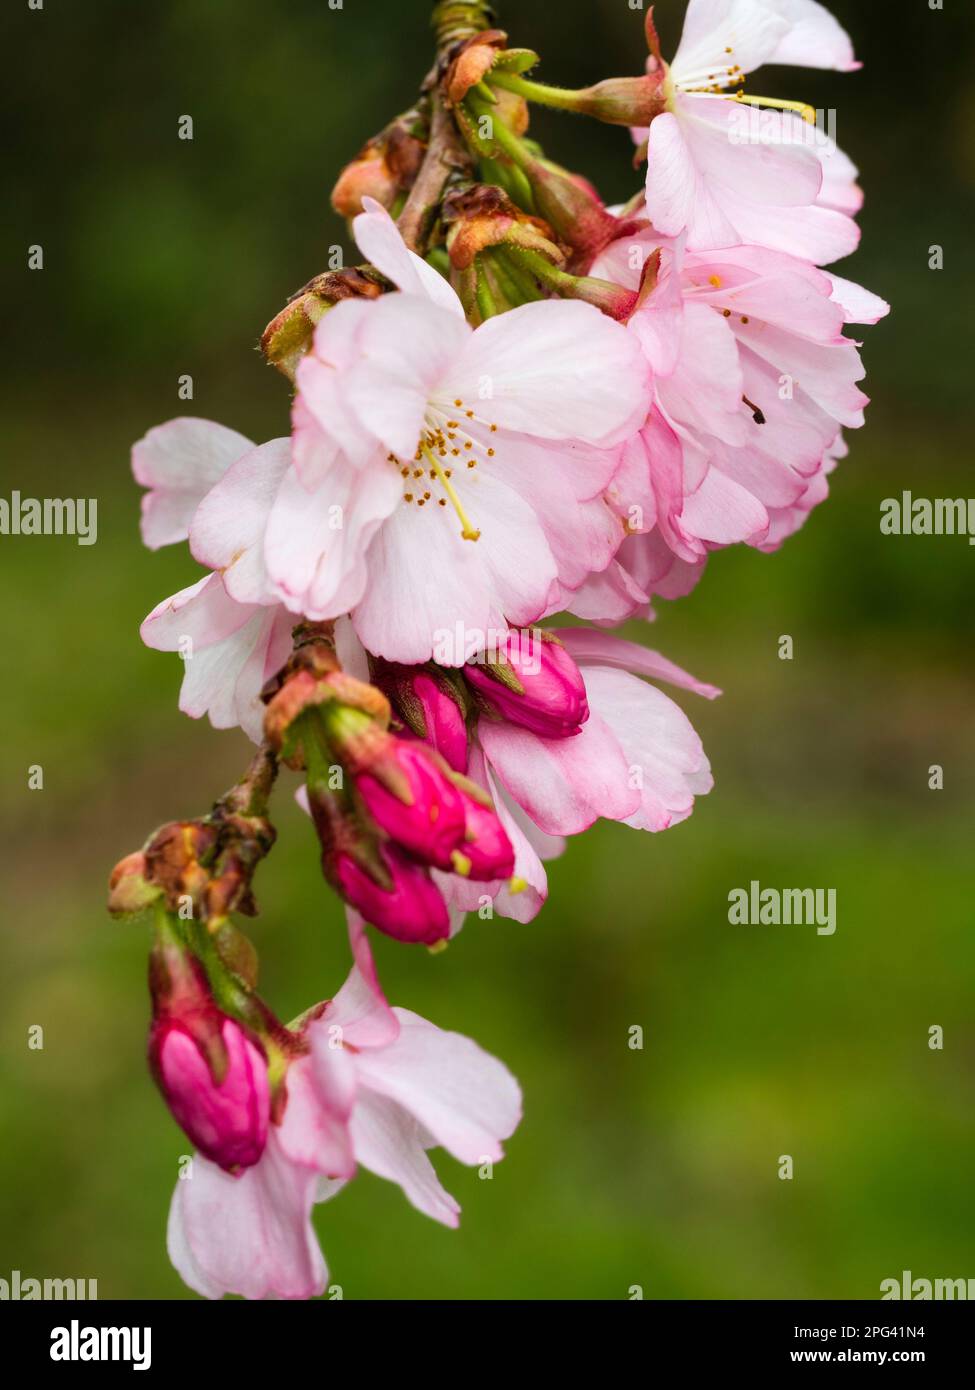 Pink, semi double blossom of the hardy, early spring flowering cherry tree, Prunus 'Accolade' Stock Photo